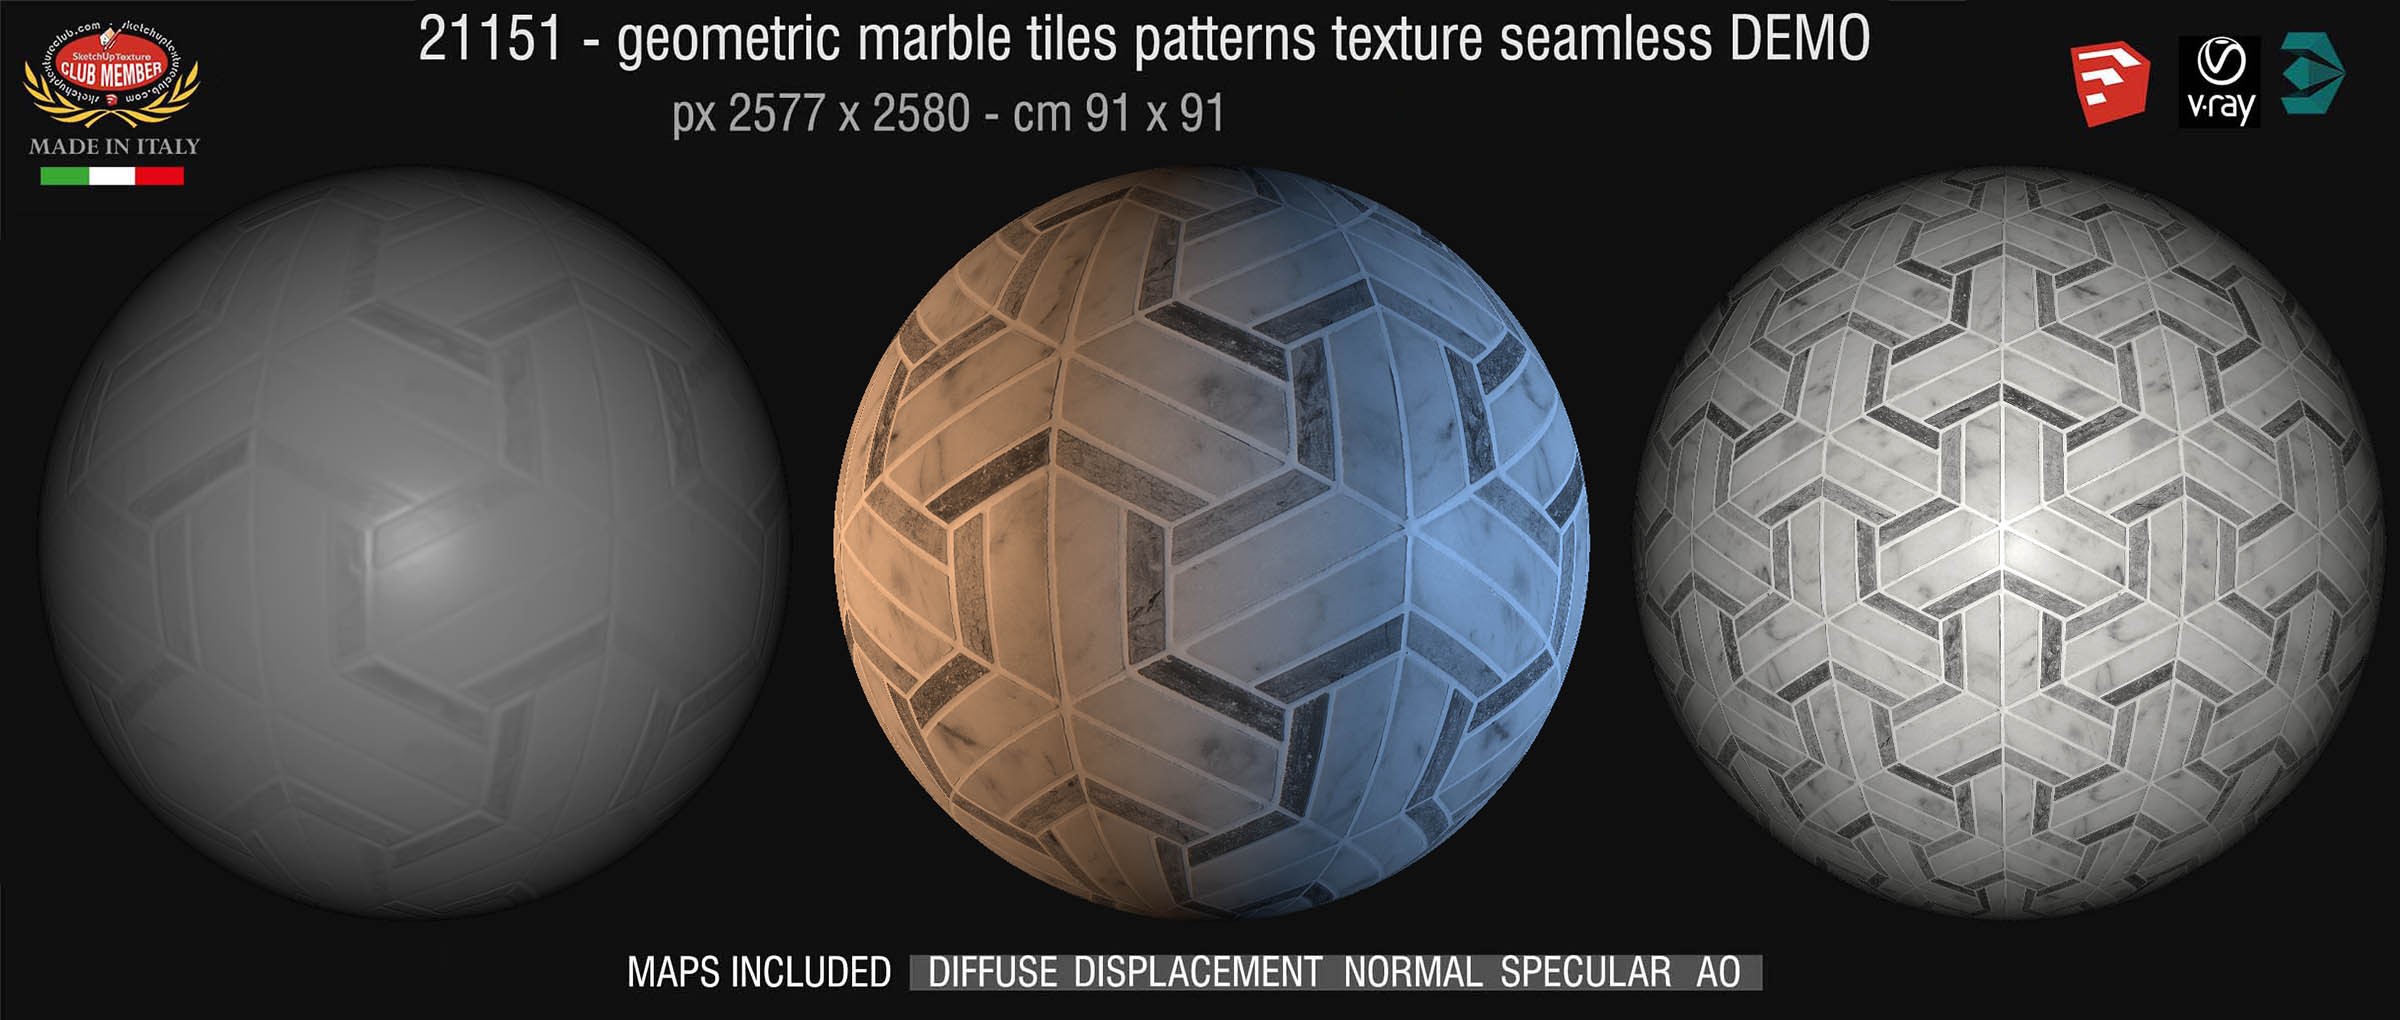 21151 Geometric marble tiles patterns texture seamless + maps DEMO